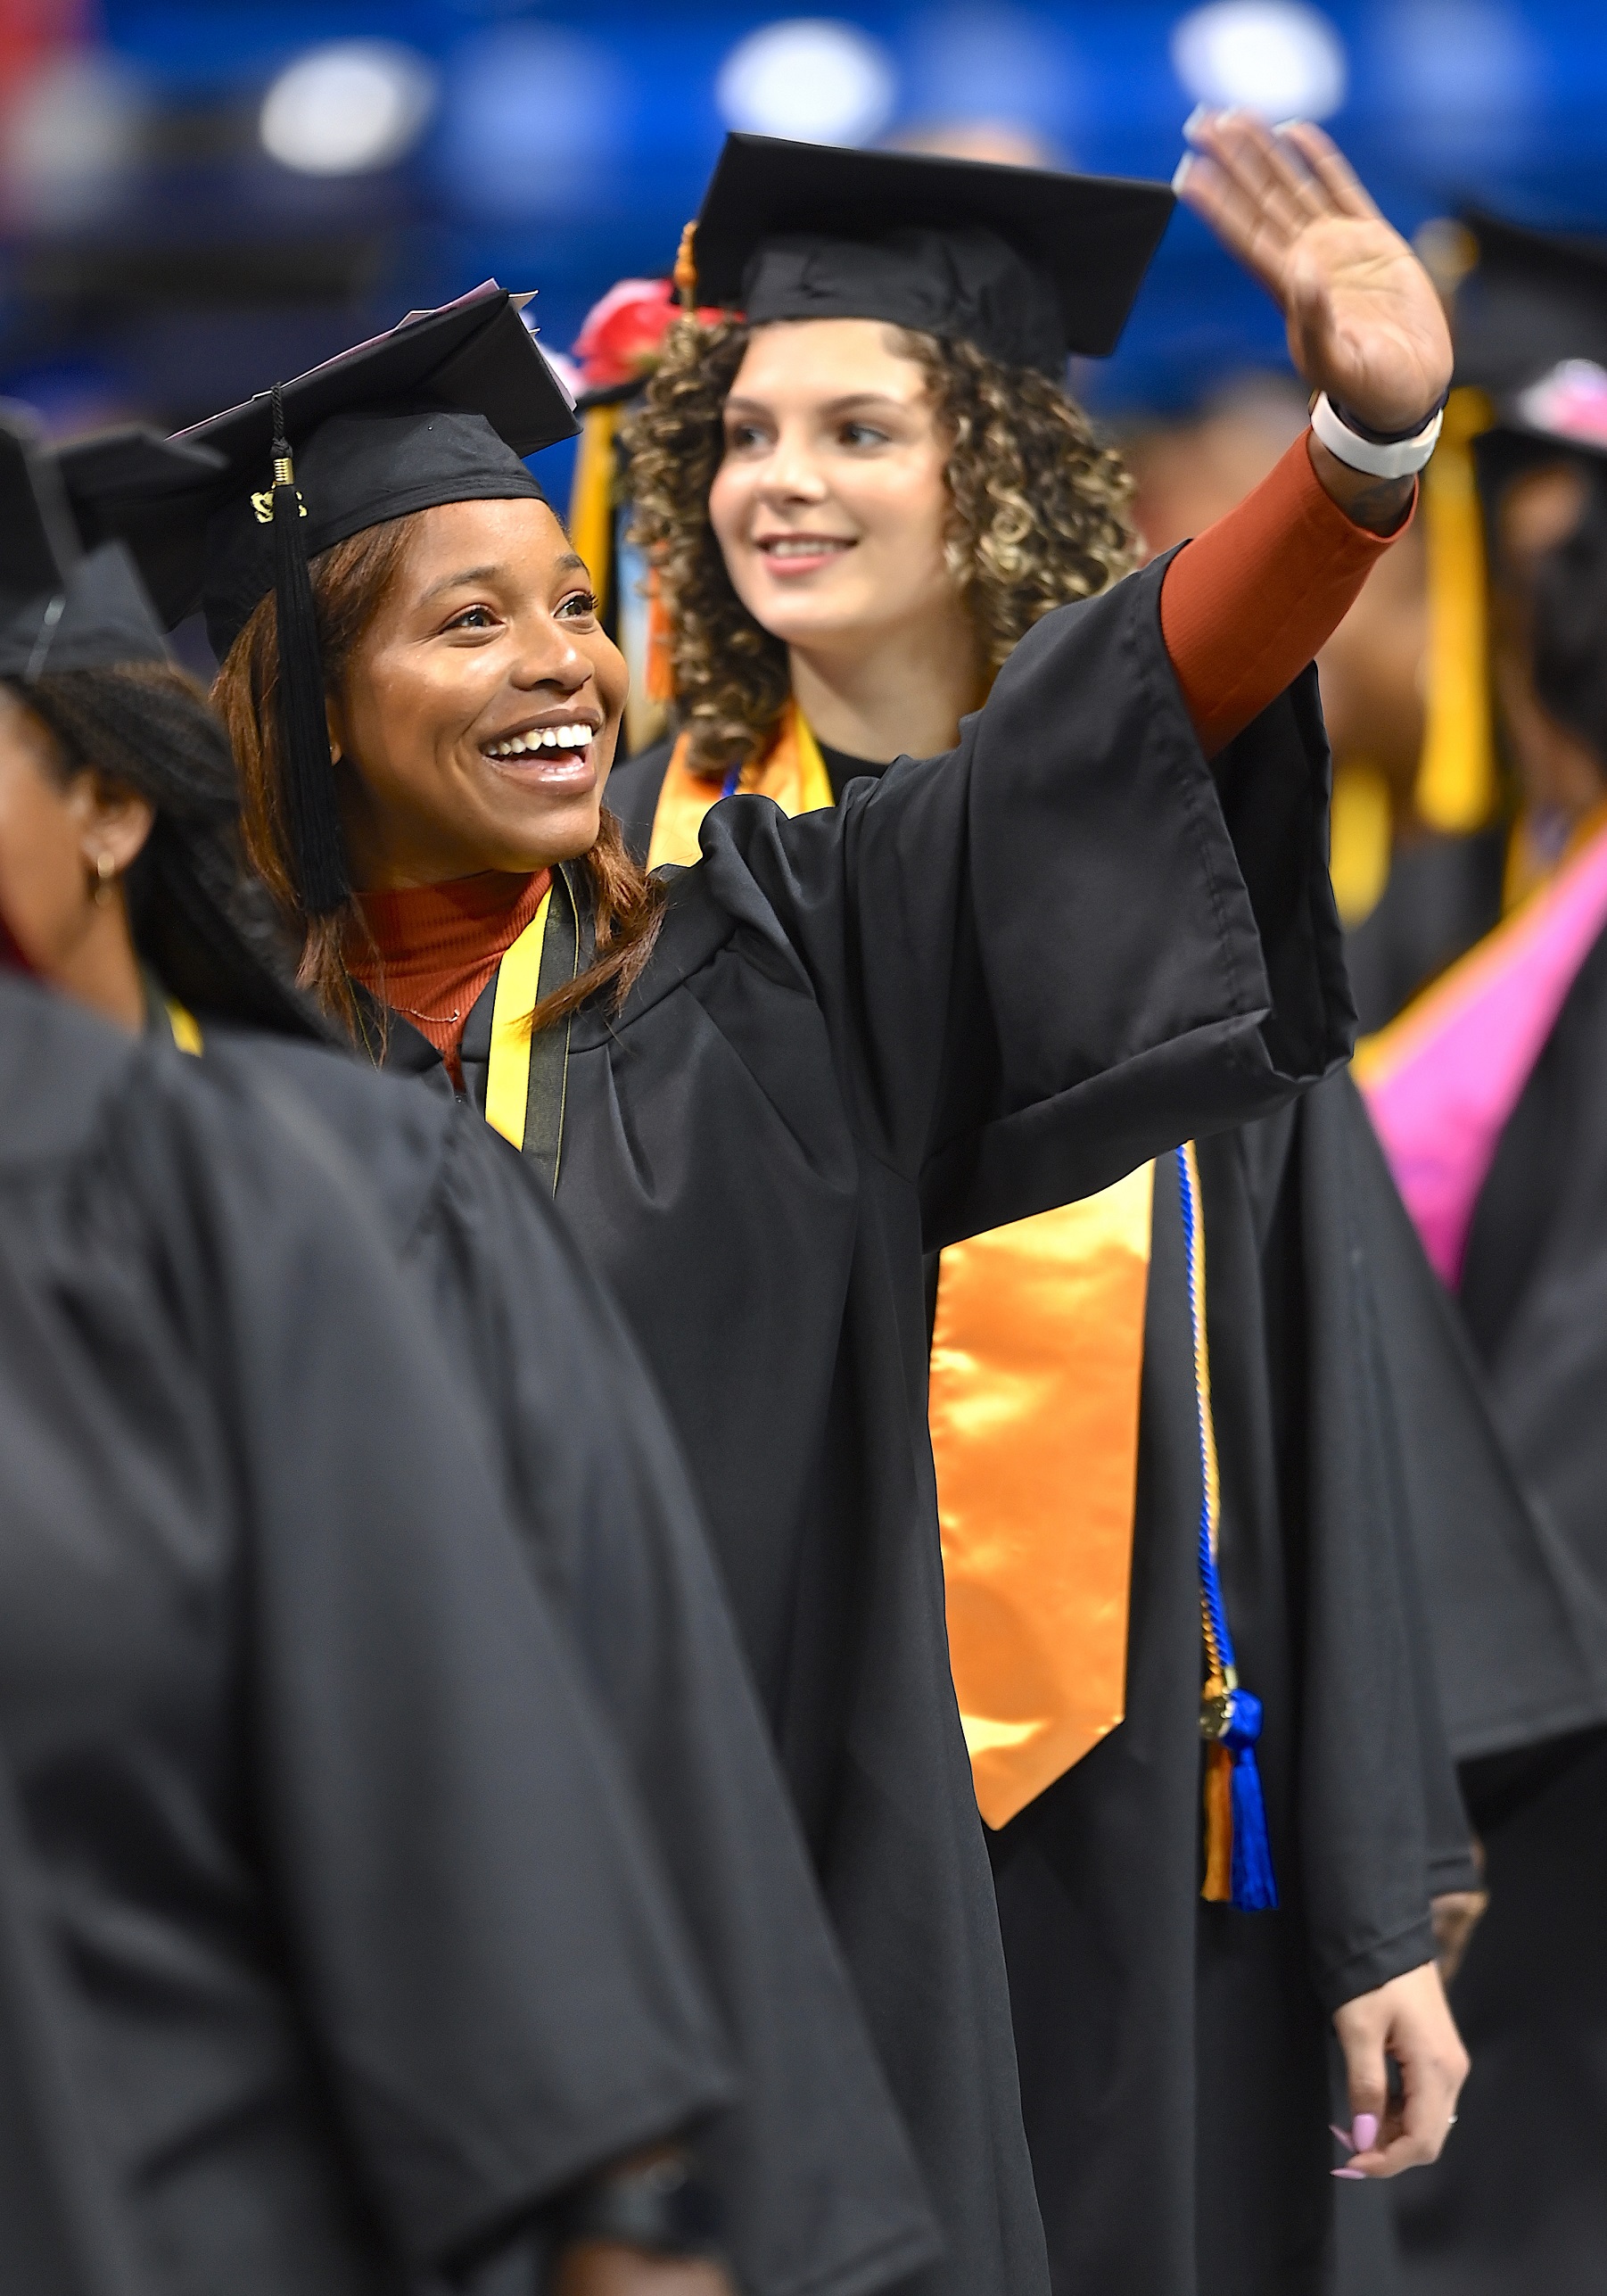 A graduate smiles and raises her hand to wave to the crowd.